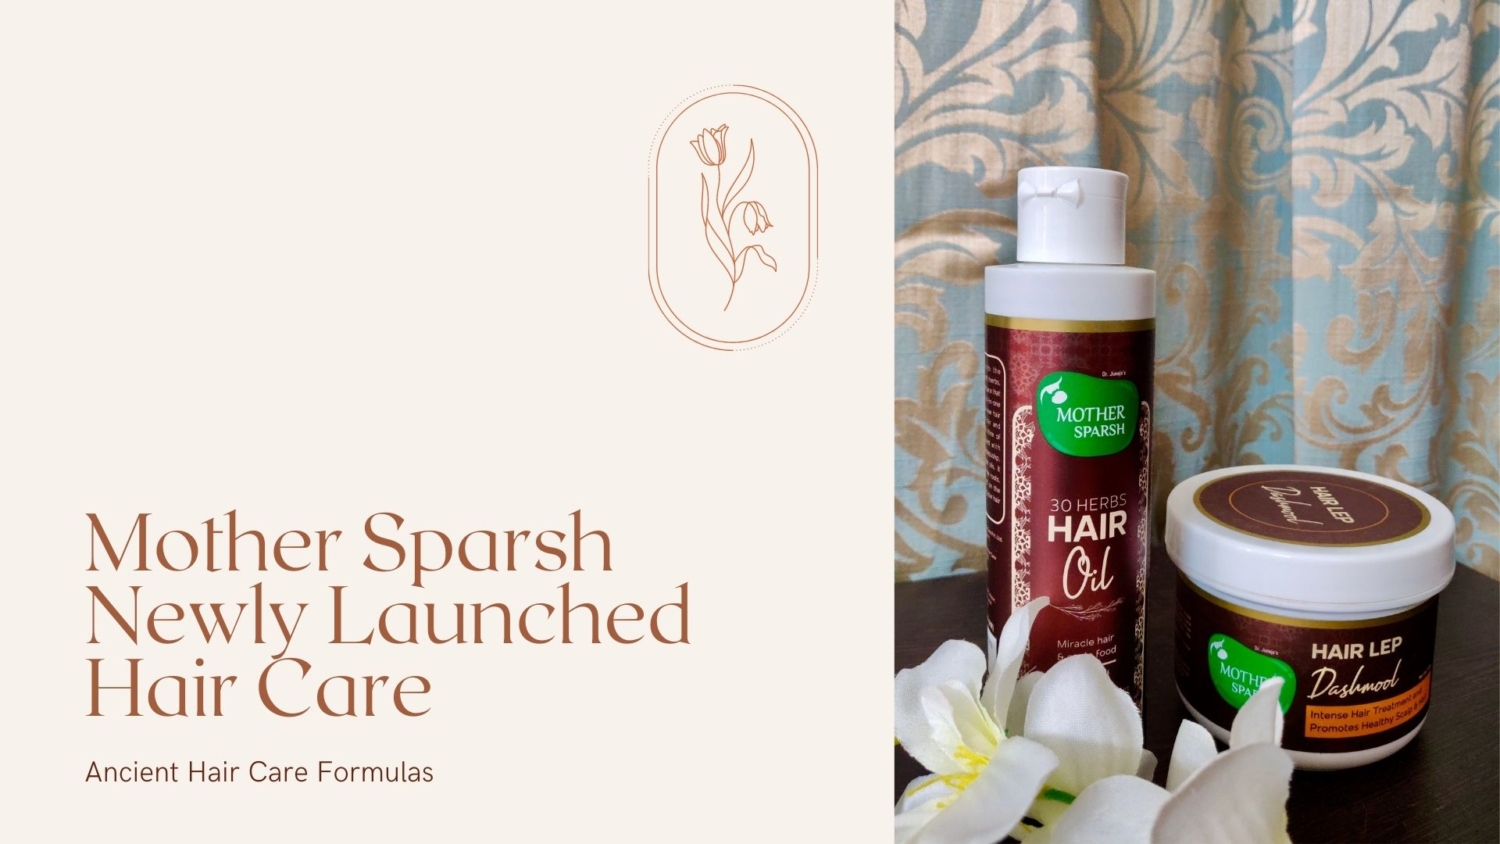 Mother Sparsh hair care